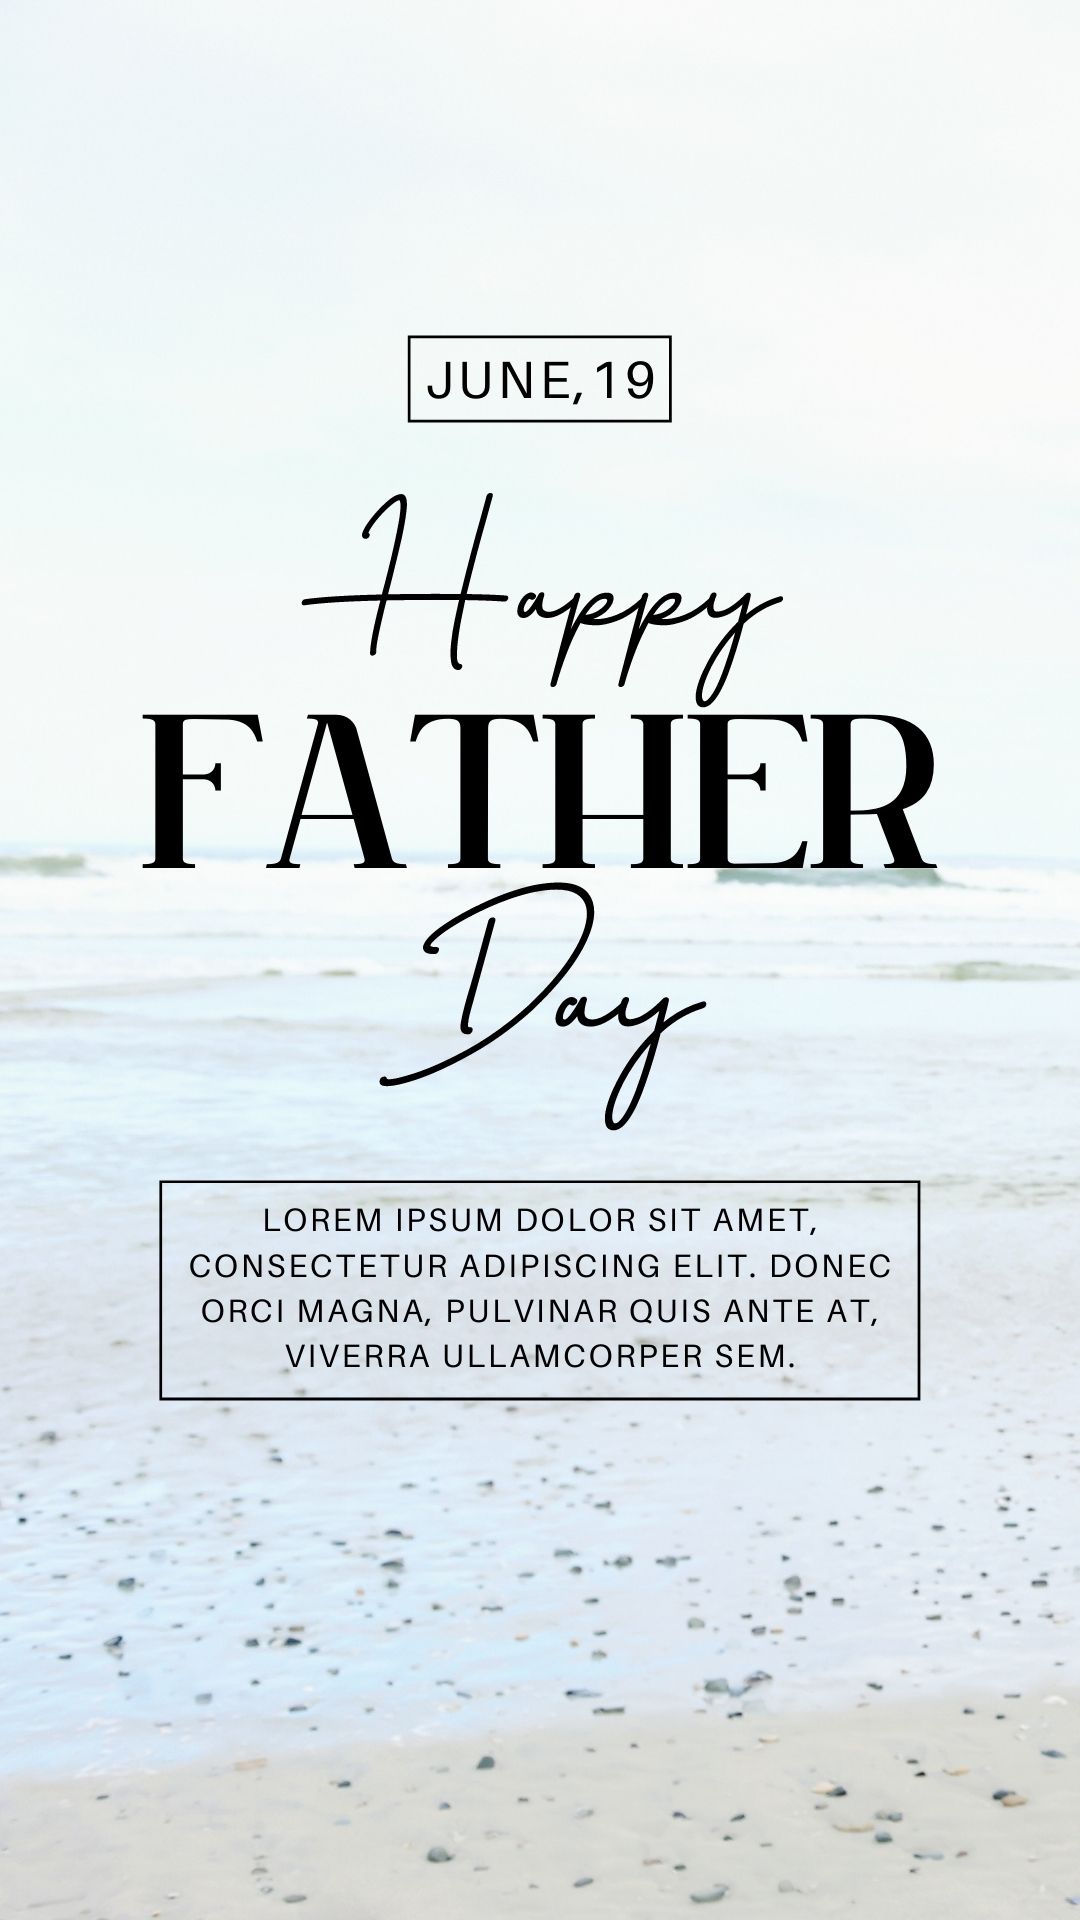 best happy father's day wishes images for instagram story (9)